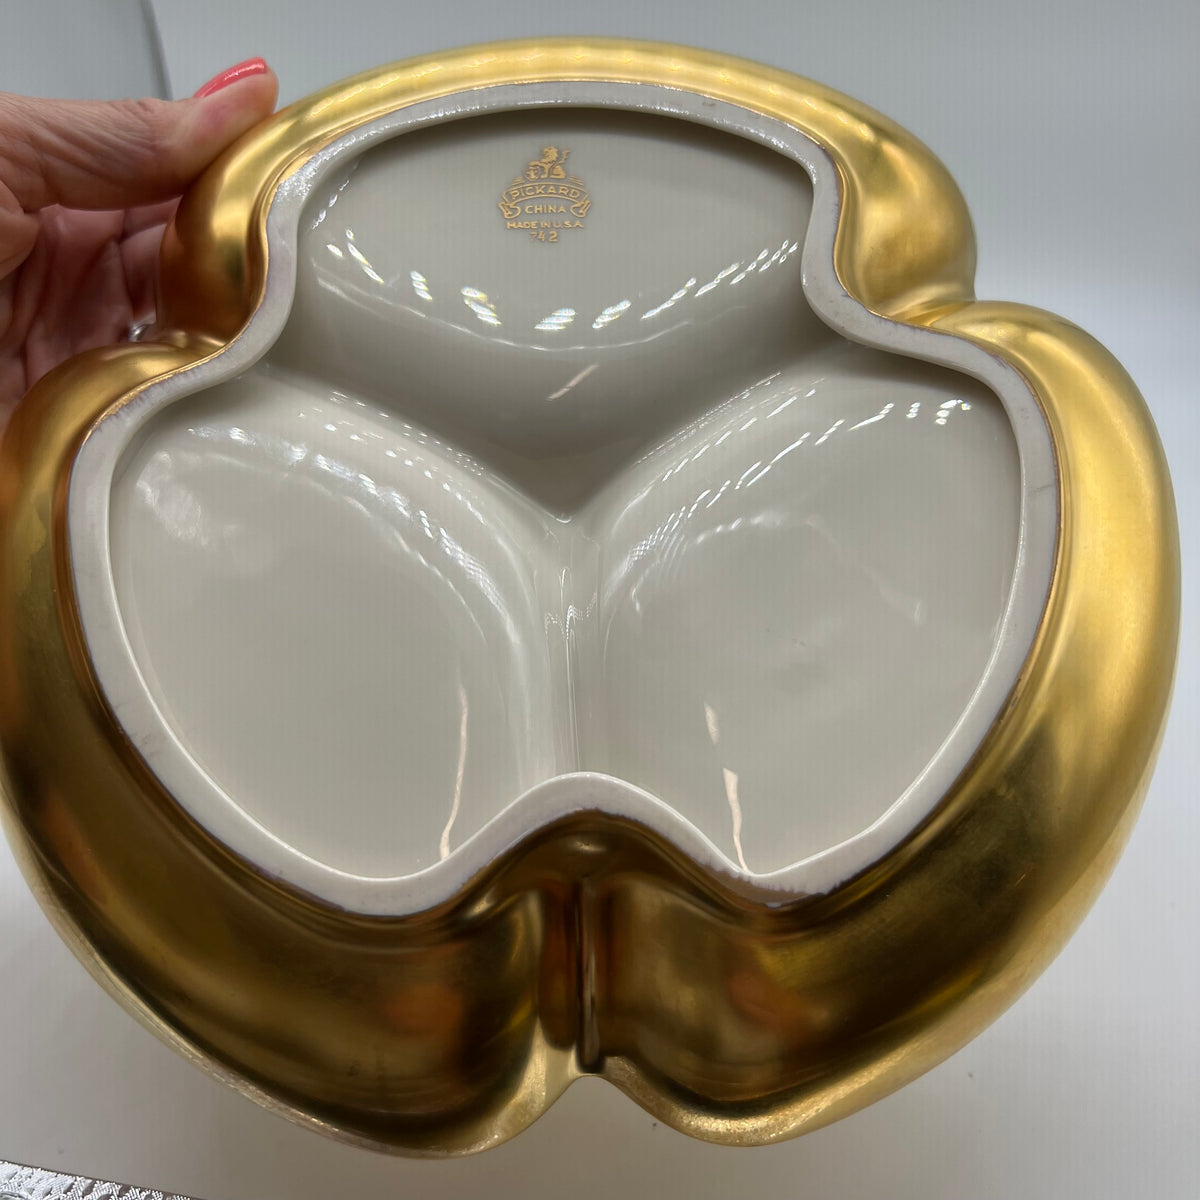 Pickard China, made in USA, 24k gold #742, divided dish - 3 sections, rose and daisy motif, excellent condition, no chips or cracks, post World War II production, approximately 8.25" diameter with scalloped edge.